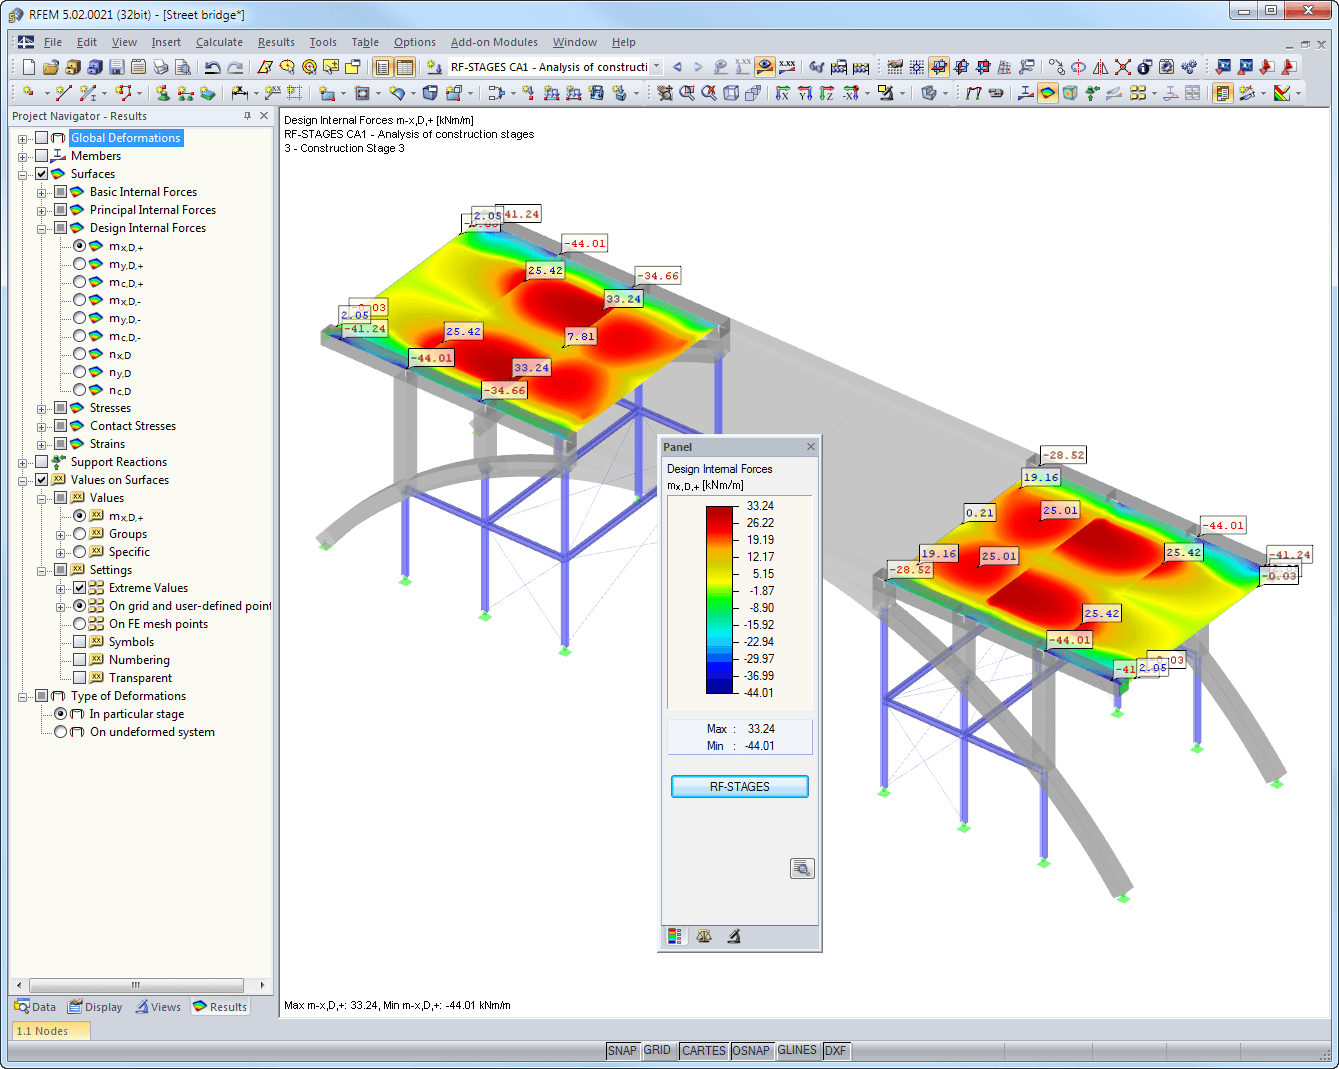 Design Internal Forces Shown for Construction Stage 3 in RFEM